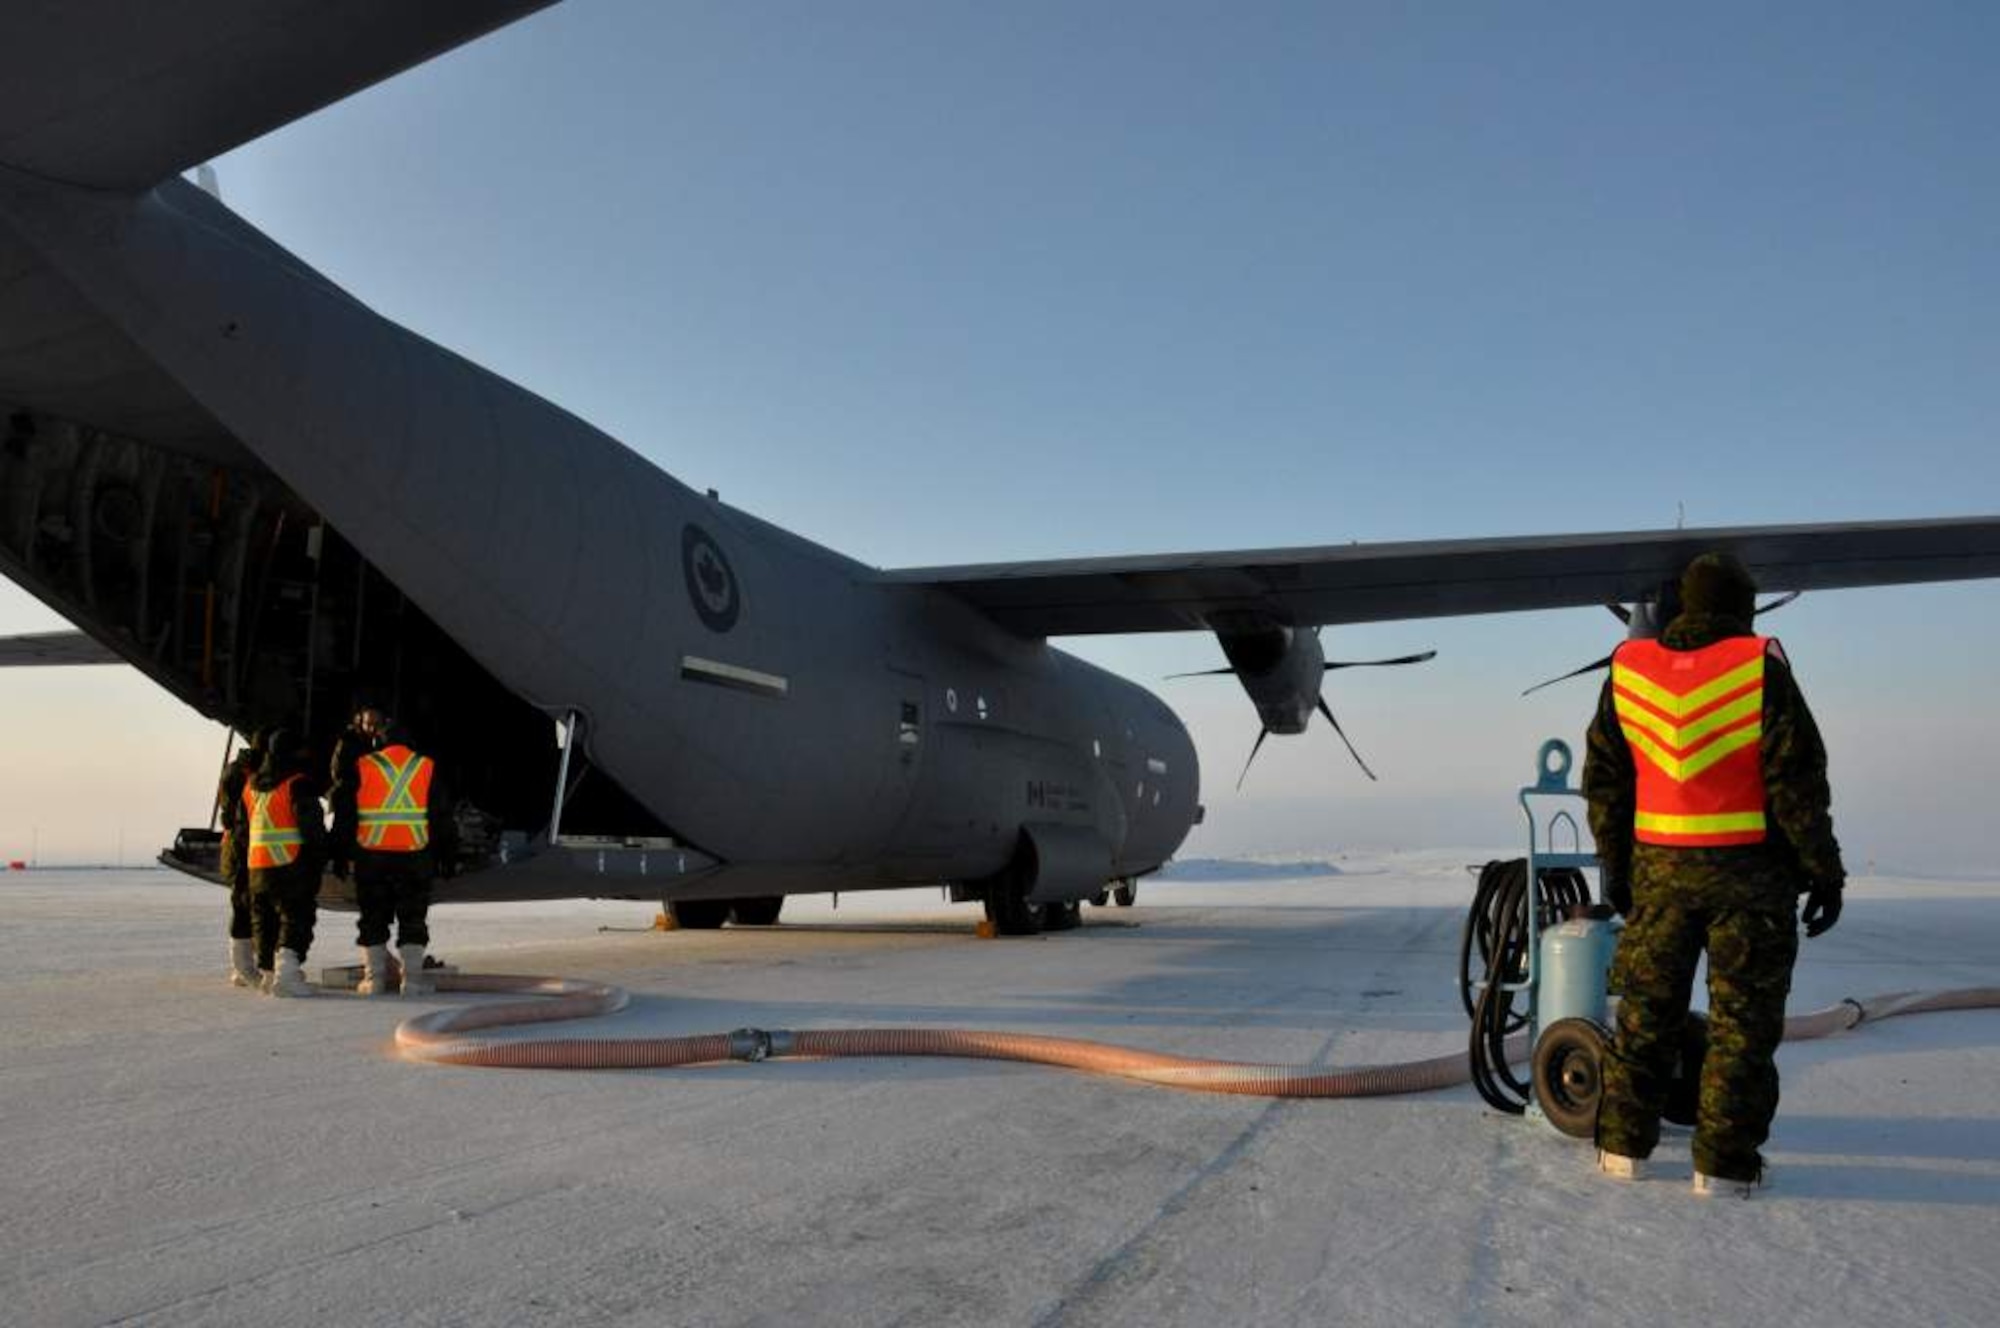 Royal Canadian Air Force maintainers prepare to fill a fuel bladder inside a C-130 Globemaster III aircraft for delivery to Canadian Forces Station Alert Sept. 30. The resupply of CFS Alert was part of Operation Boxtop, a bi-annual mission to resupply Canadian outposts to assist them in sustaining the harsh Arctic winters. (U.S. Air Force photo/Tech. Sgt. Jason Brumbaugh)